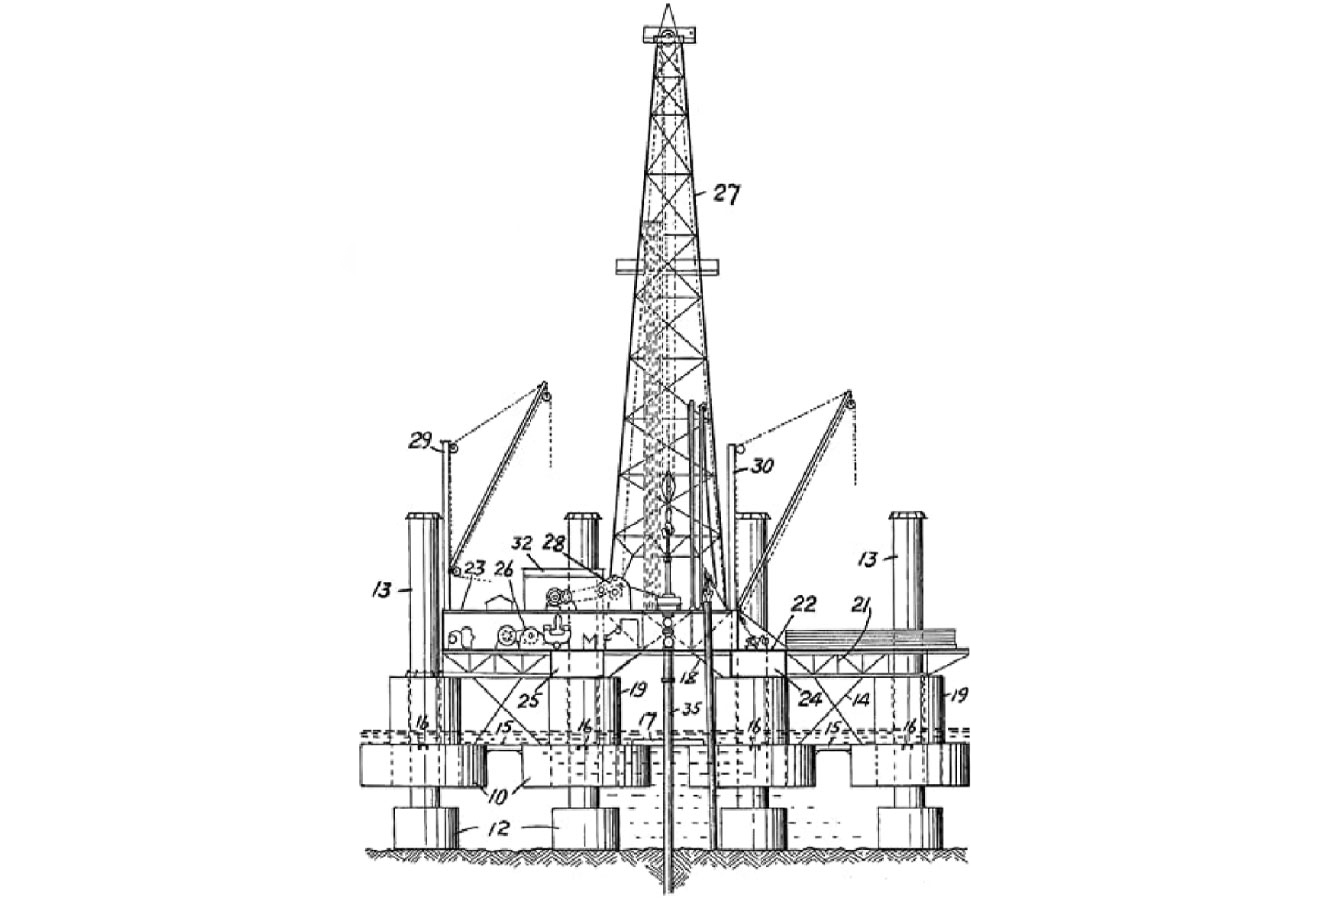 Drawings for Electrical Systems in Land Rig Applications